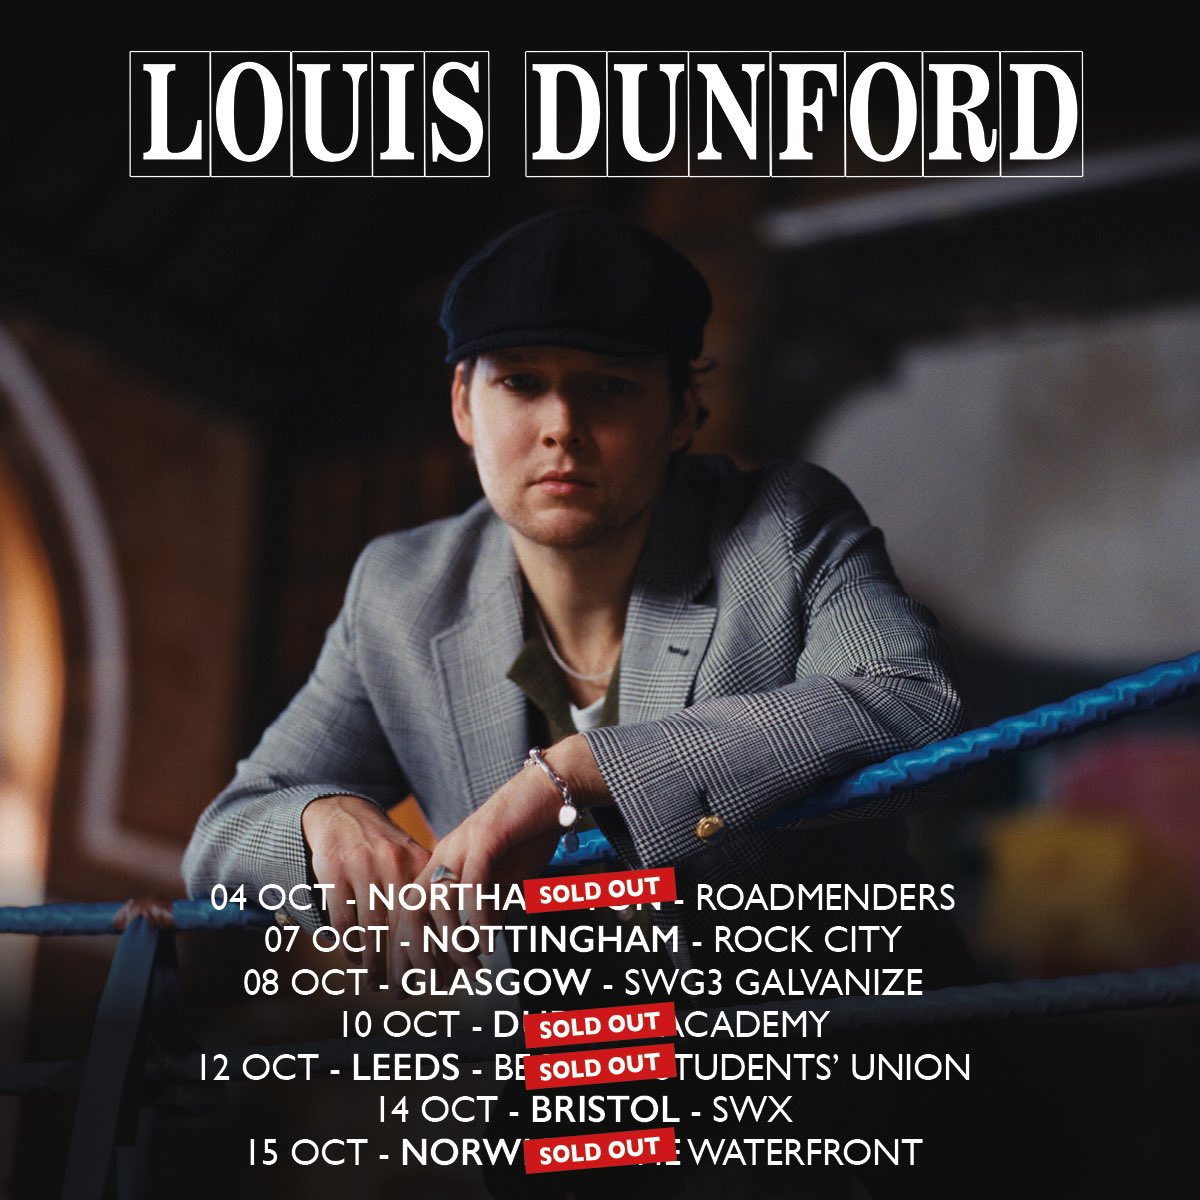 Last tickets available here - louis-dunford.com/events/